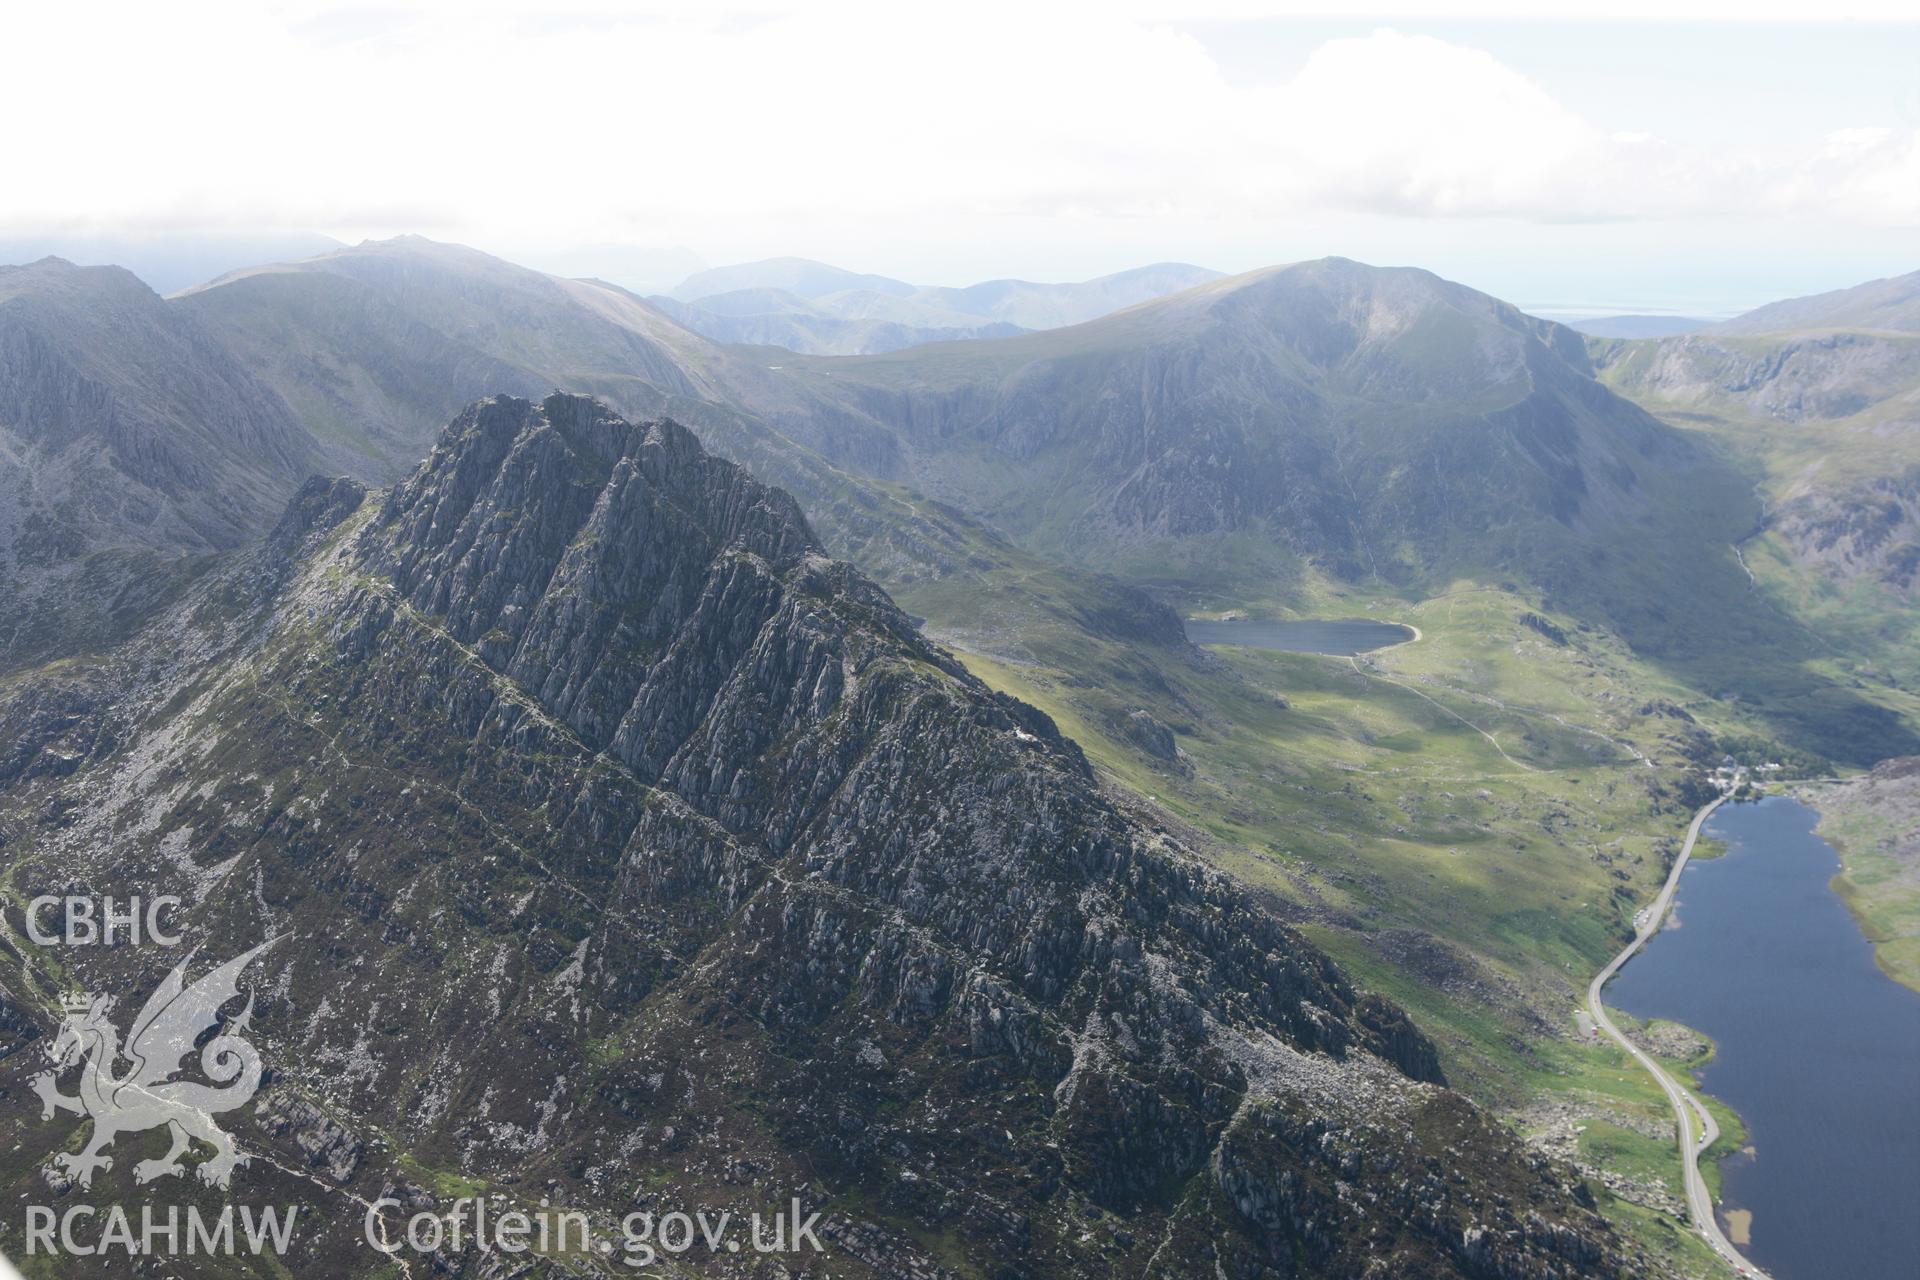 RCAHMW colour oblique photograph of Tryfan, mountain, from east. Taken by Toby Driver on 20/07/2011.